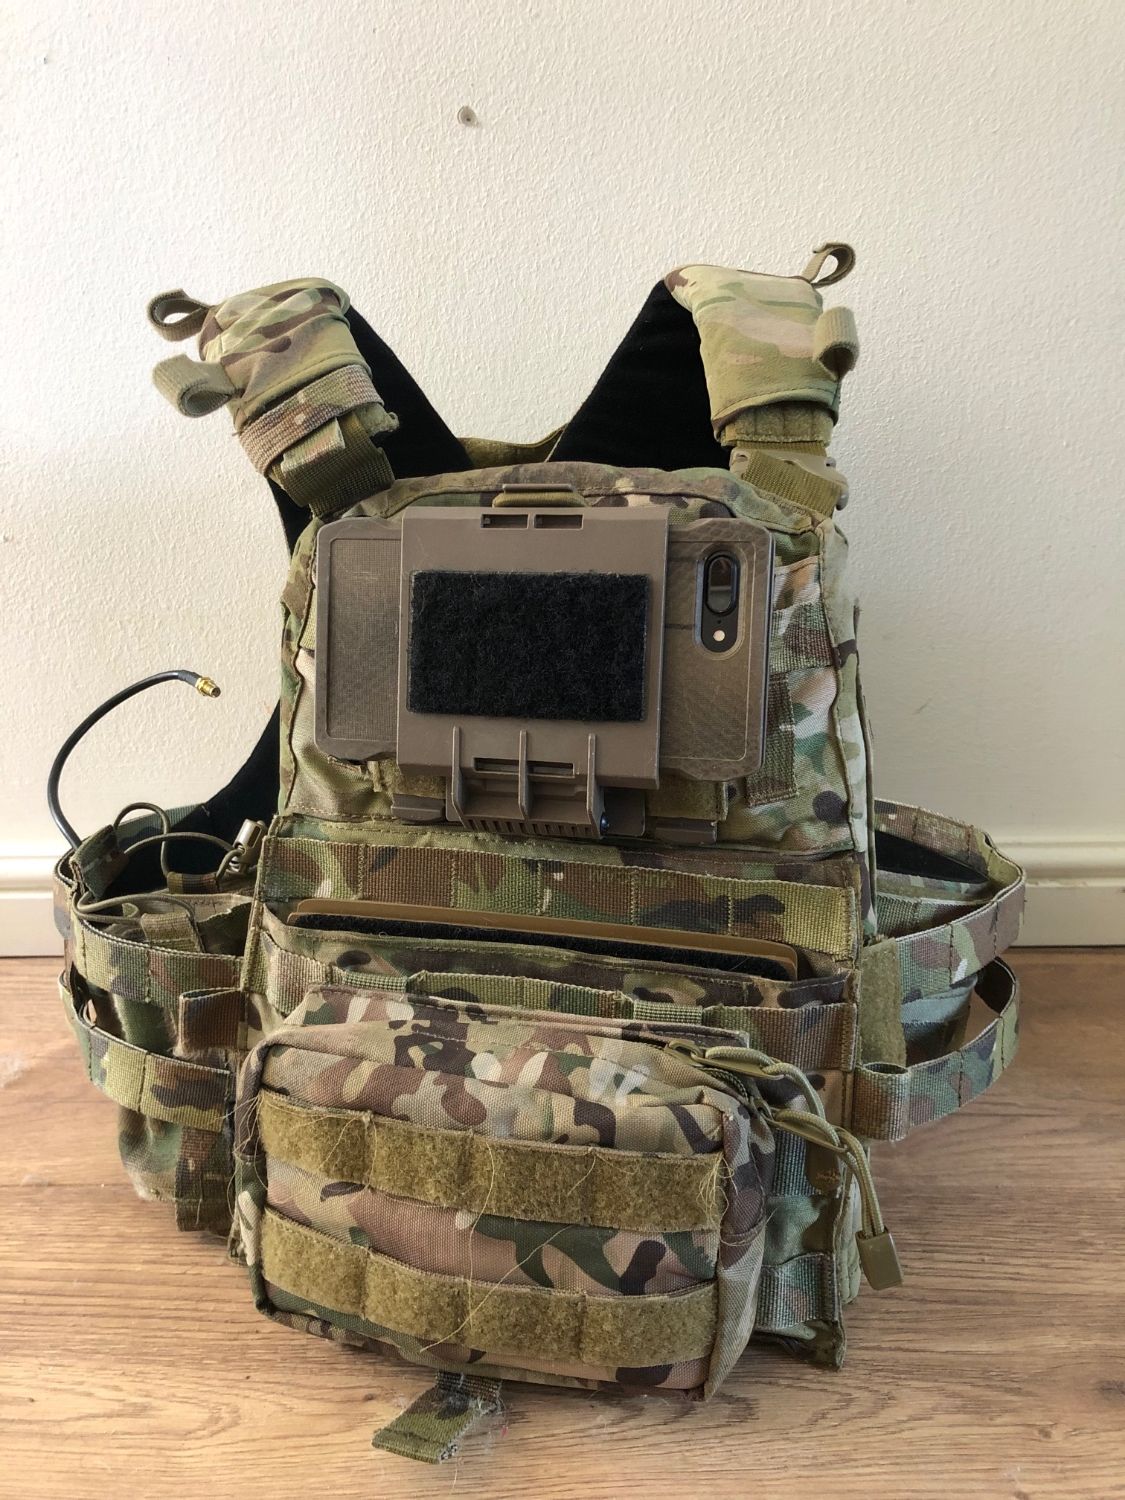 Clone crye AVS - Gear - Airsoft Forums UK